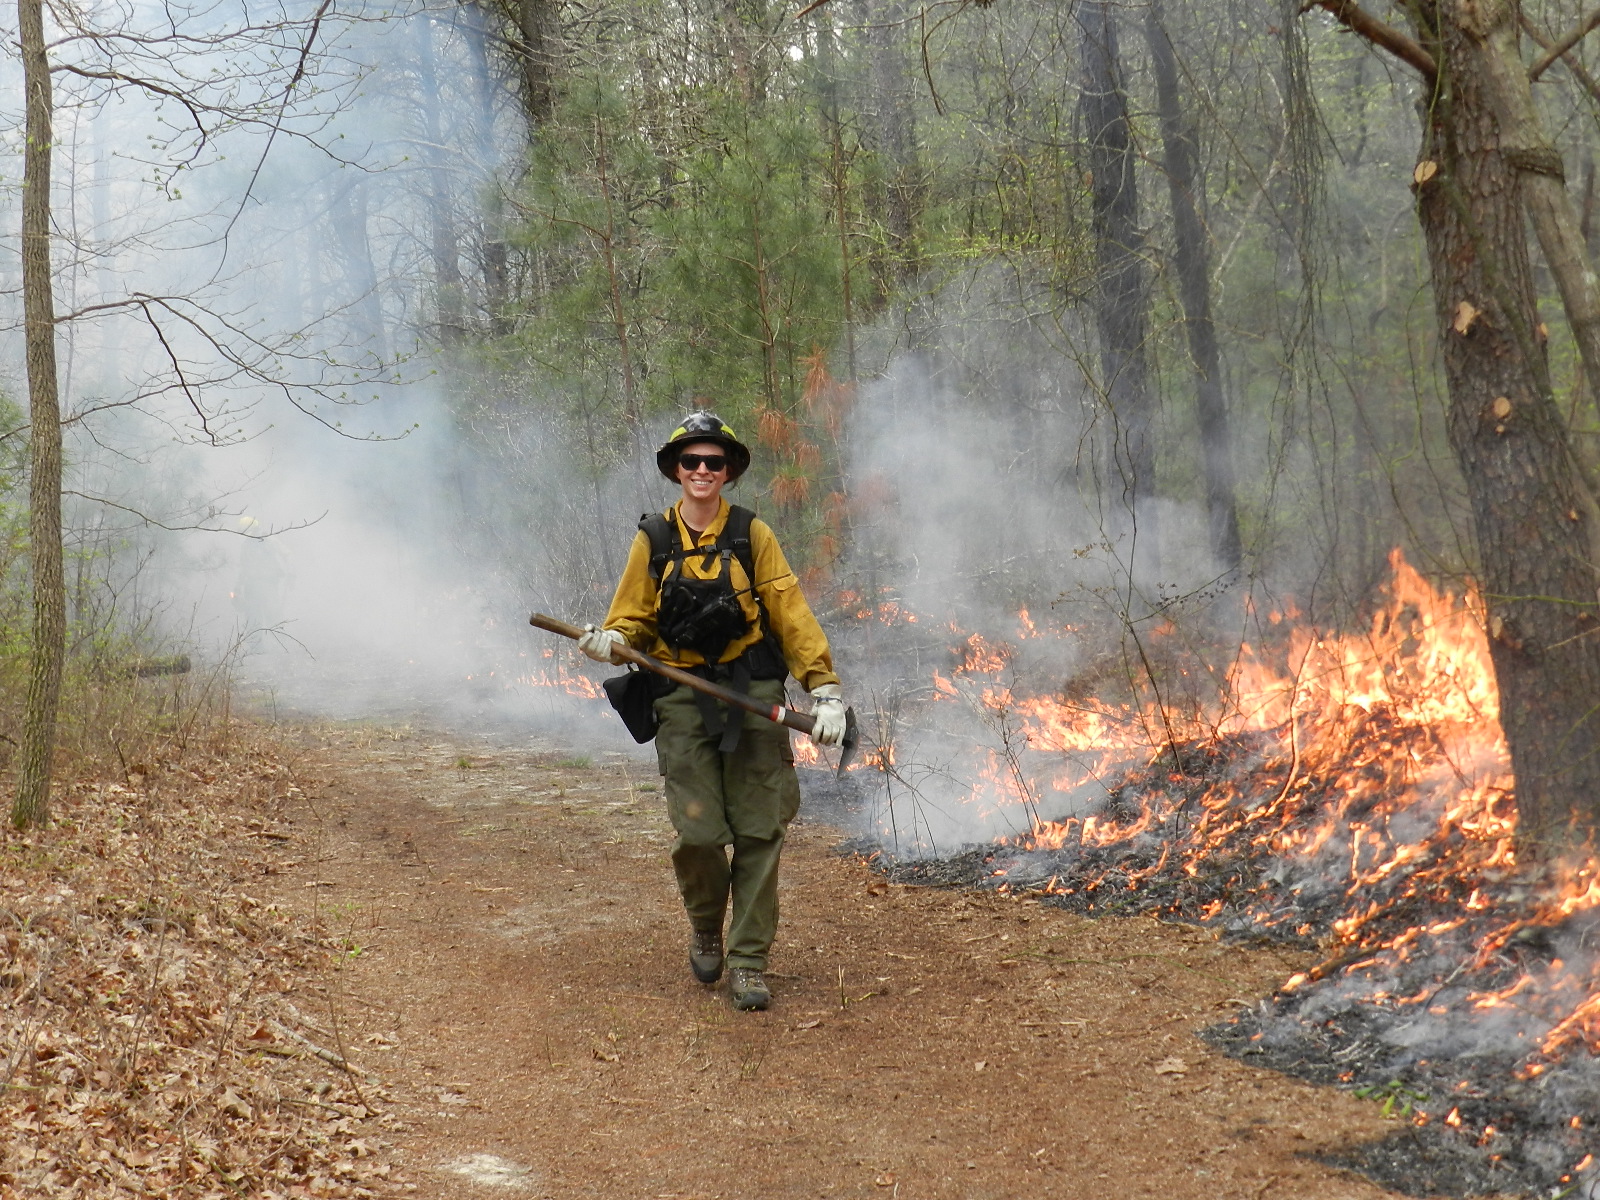 A person dressed in fire protective gear and holding an axe walks on a dirt path in a forest as a controlled fire burns behind them.